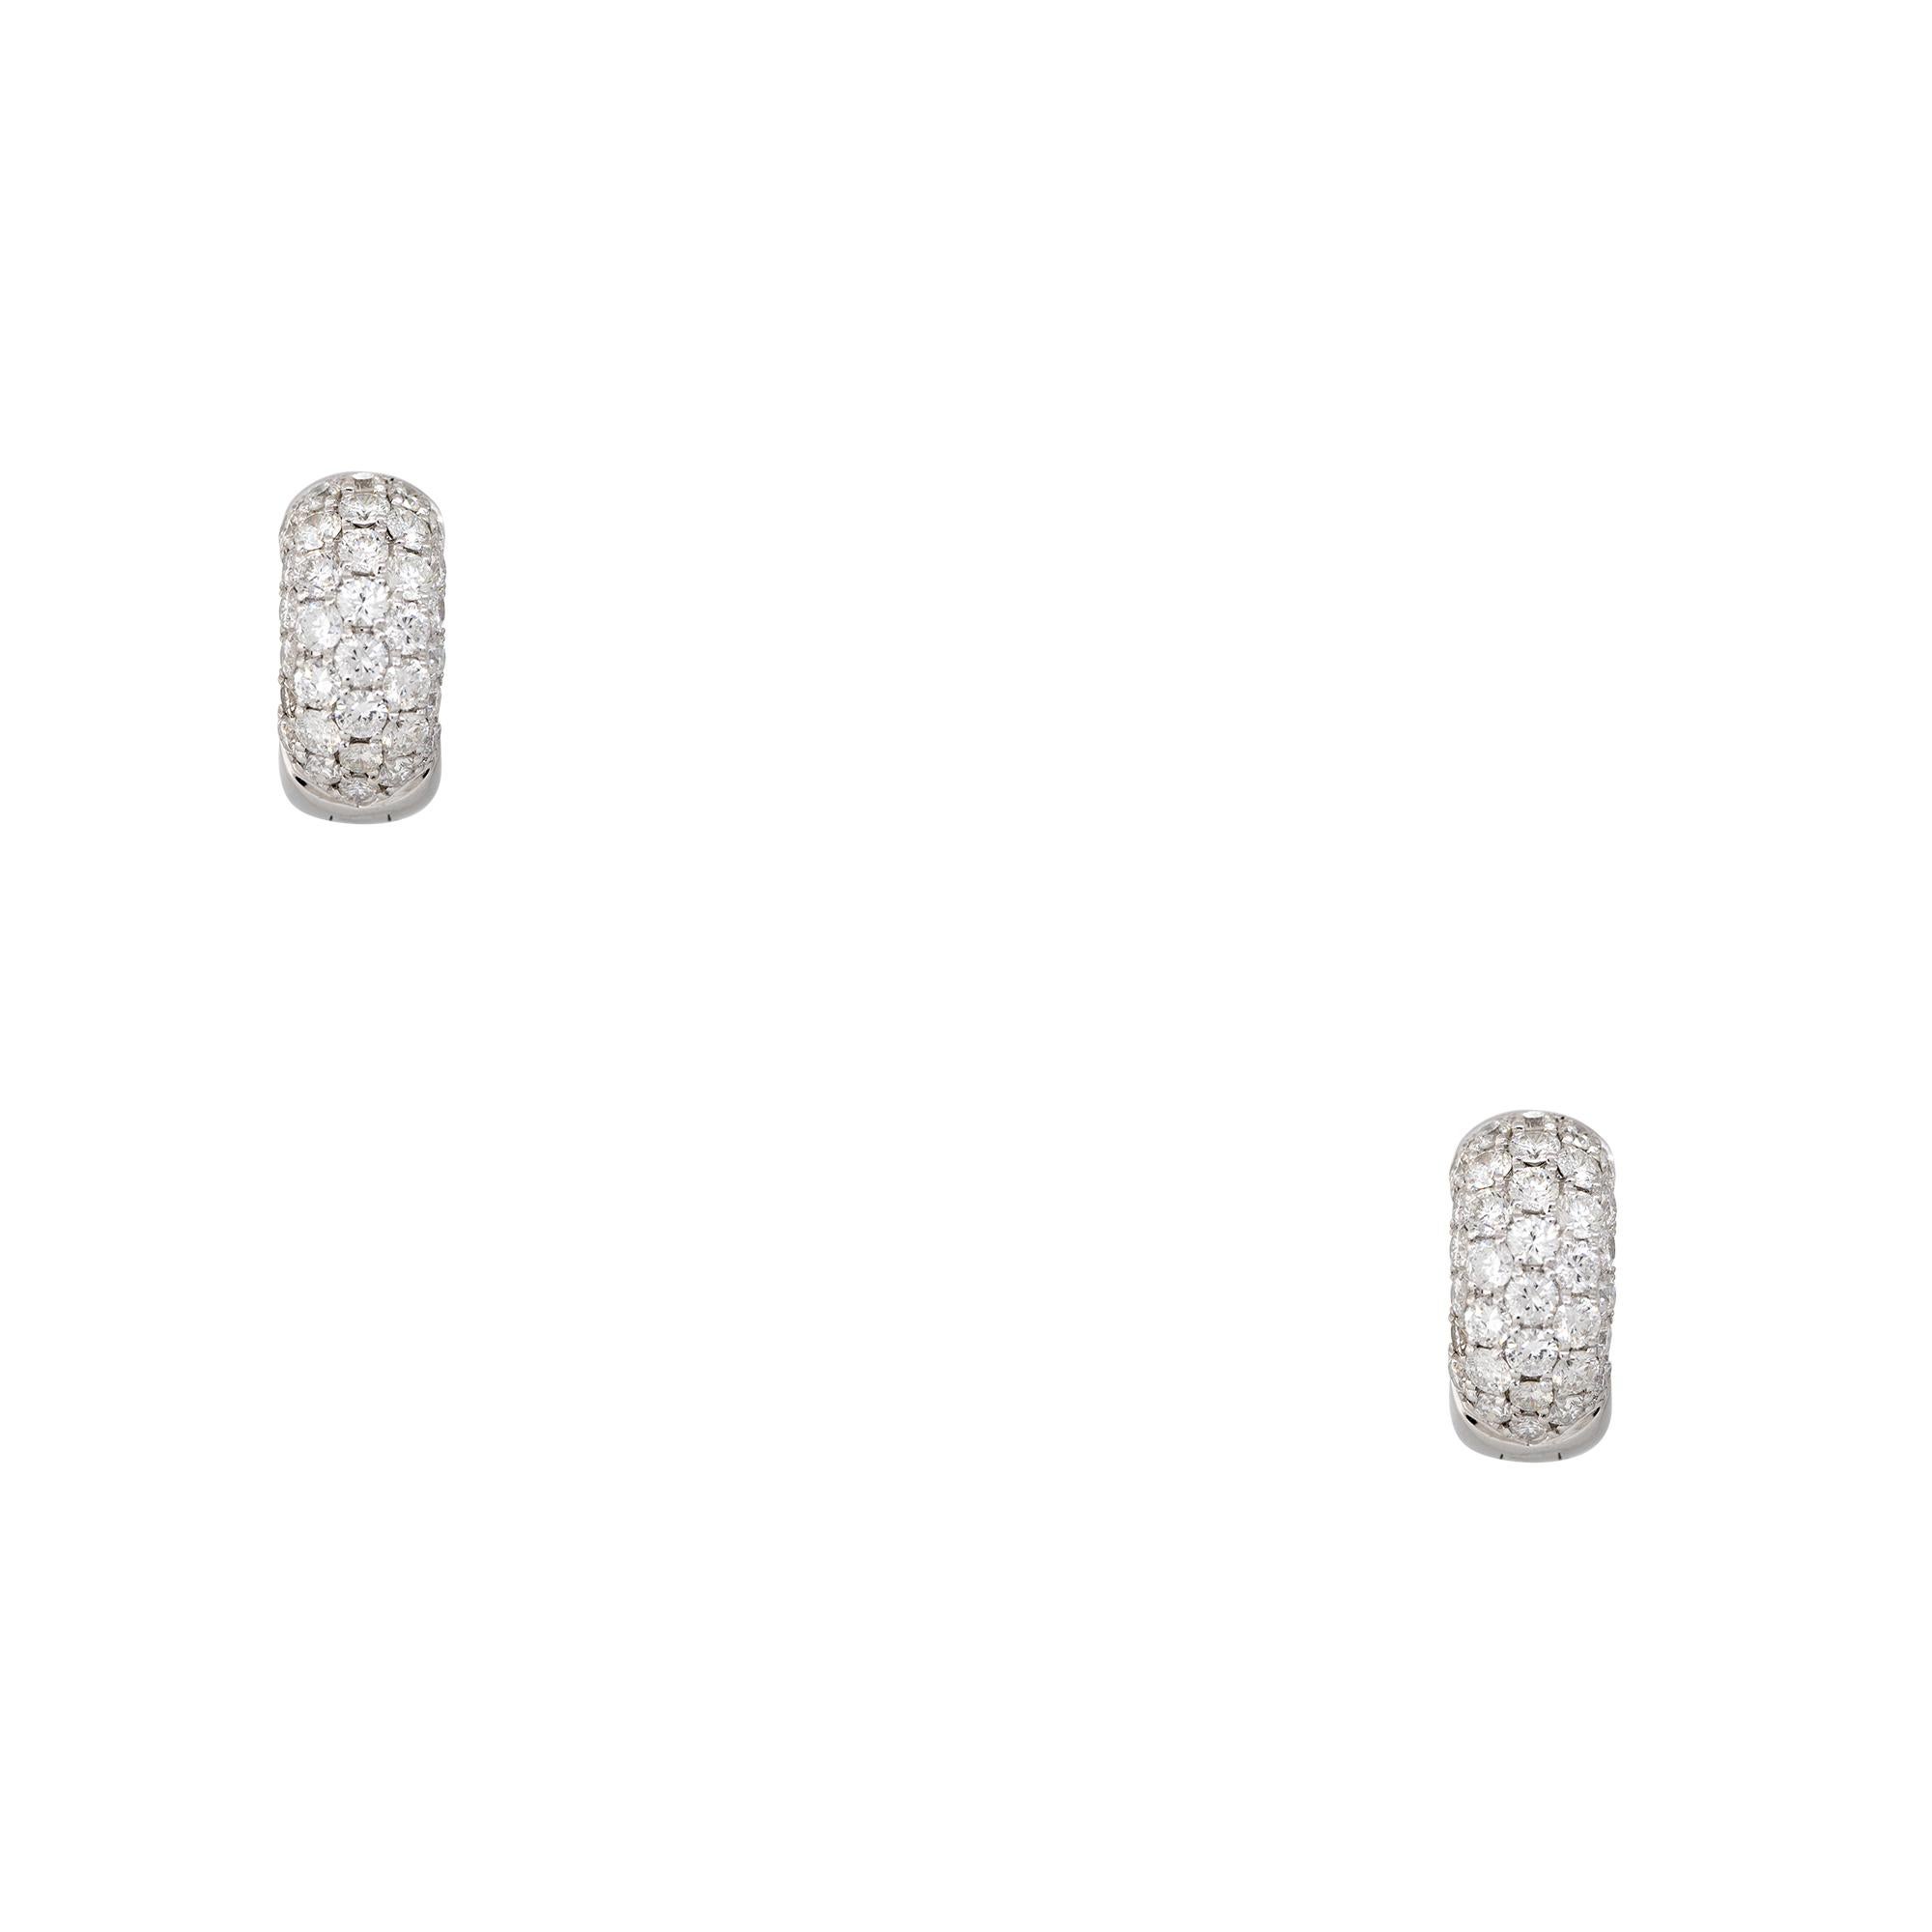 18k White Gold 2ctw Pave Diamond Mini Huggie Hoop Earrings
Material: 18k White Gold
Diamond Details: There are approximately 2.00 carats of Pave set, round brilliant cut diamonds. All diamonds are approximately G/H in color and approximately SI